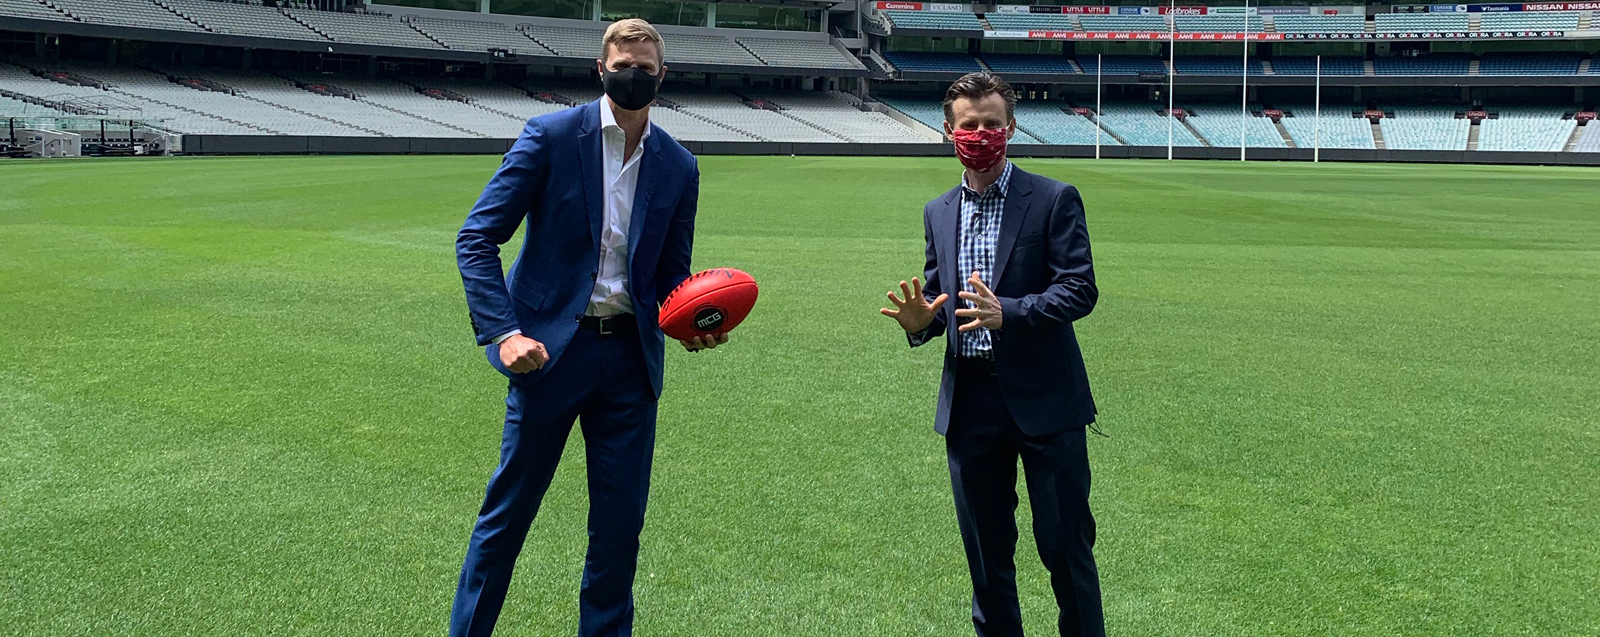 2020 AFL Grand Final preview for members